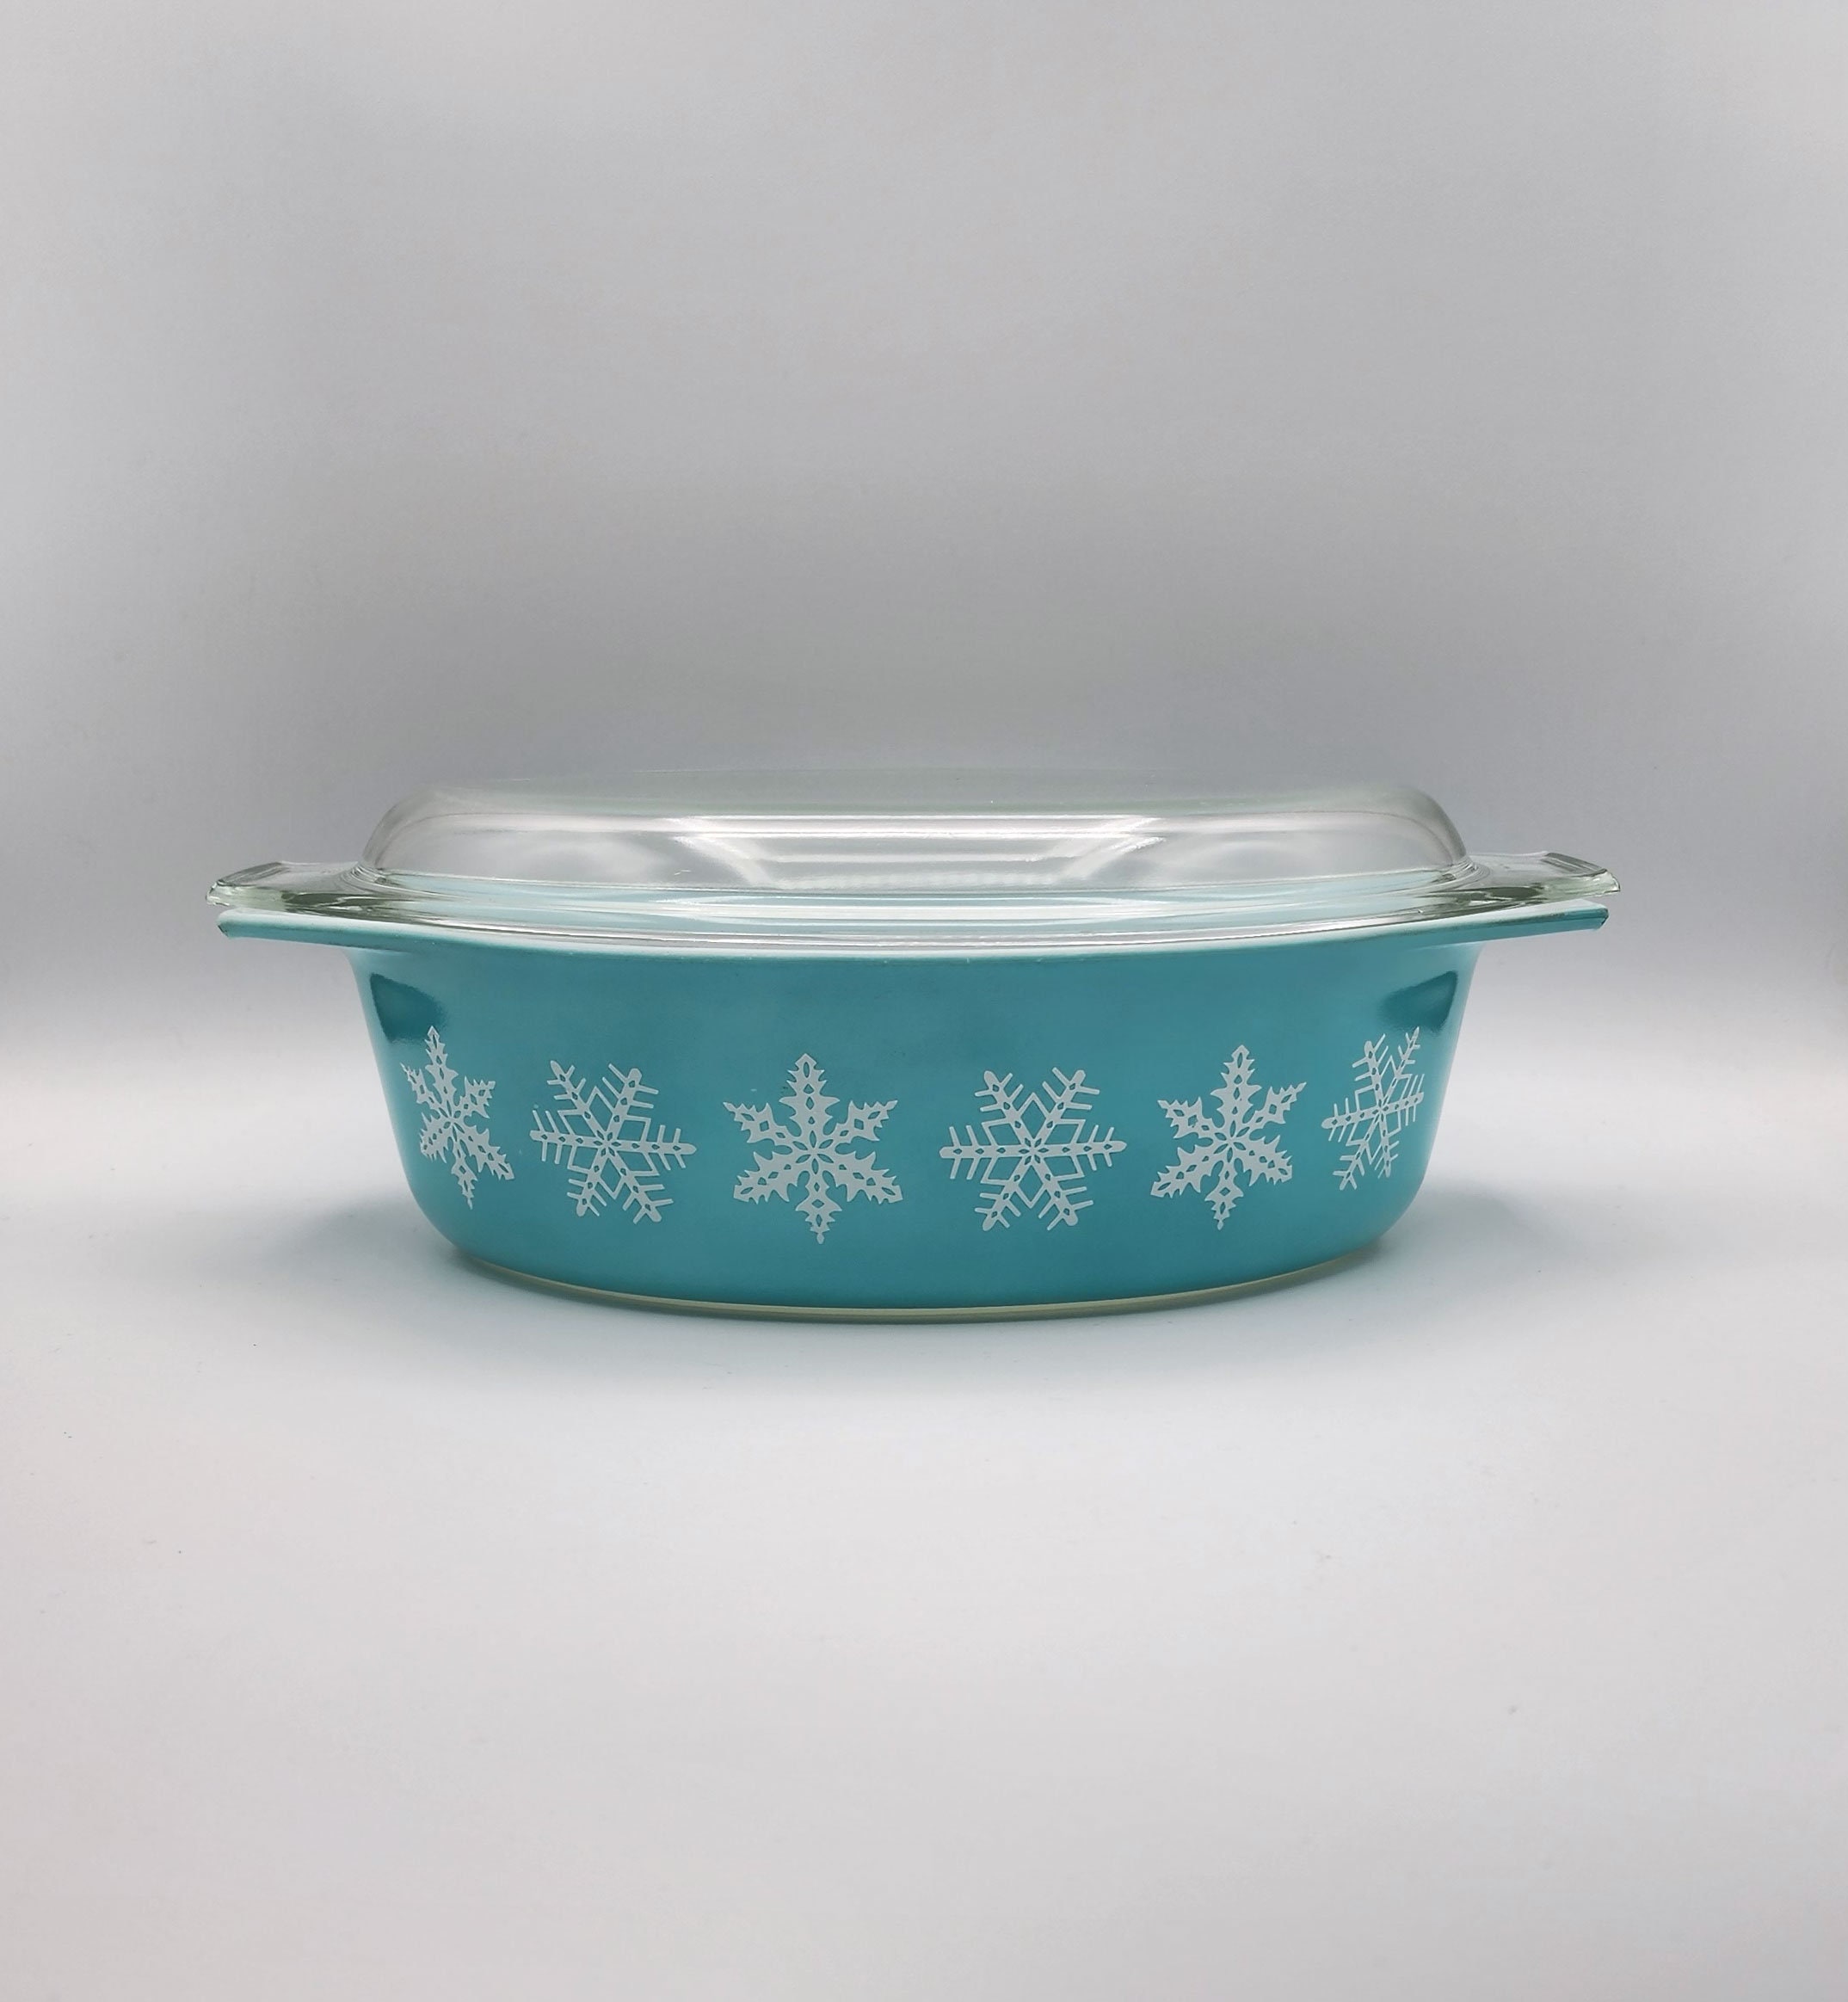 Vintage Pyrex Snowflake 1.5-quart Divided Dish With Matching Pyrex Glass Lid,  Turquoise Split Dish, Covered Dish 